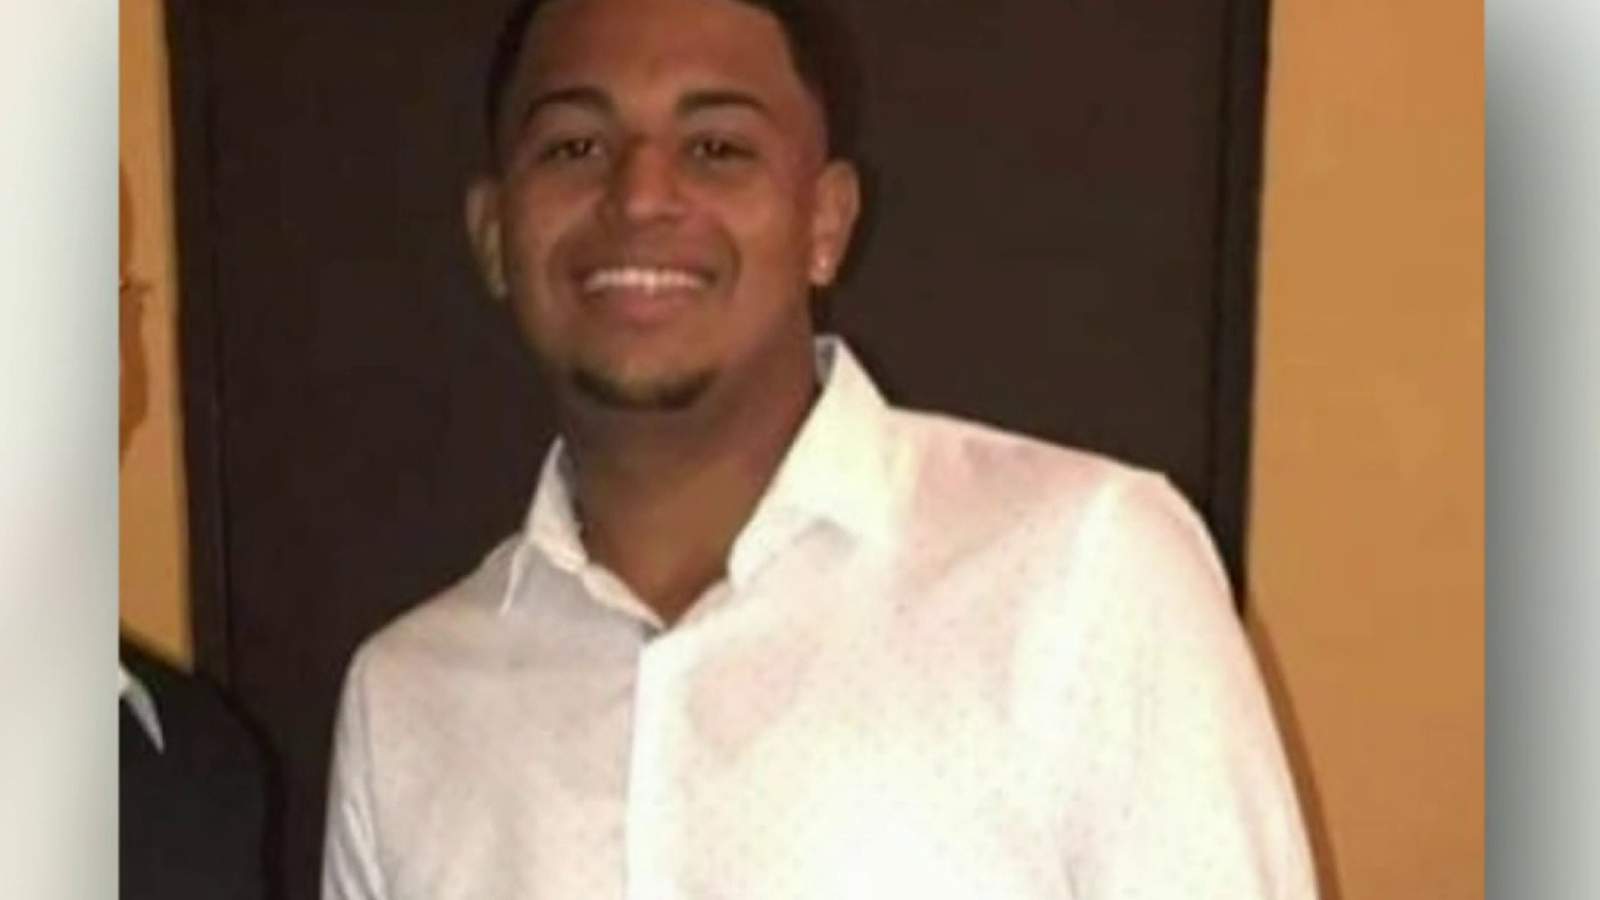 Family pleads for answers in 2020 slaying of 19-year-old Puerto Rico native in Detroit